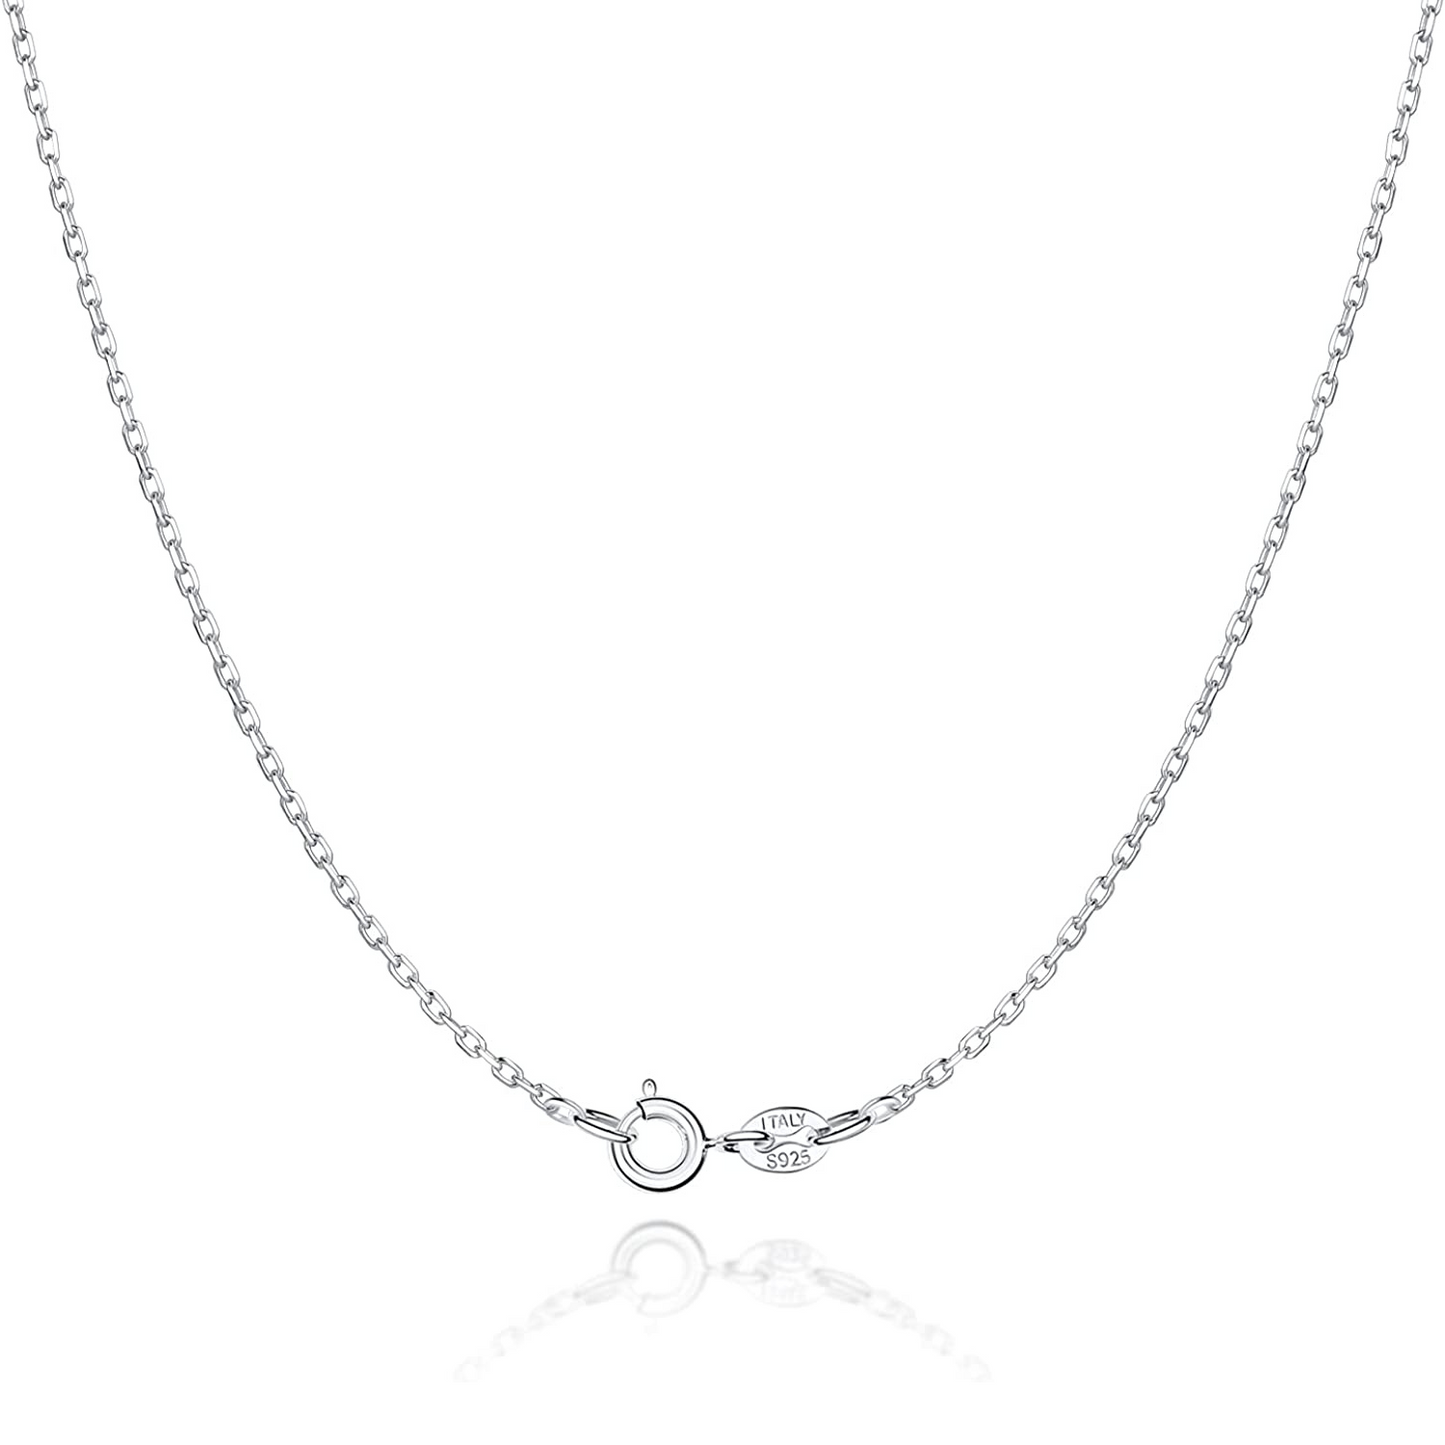 92.5 Sterling Silver, Cable Link Chain 16 inches + 2 inch extension